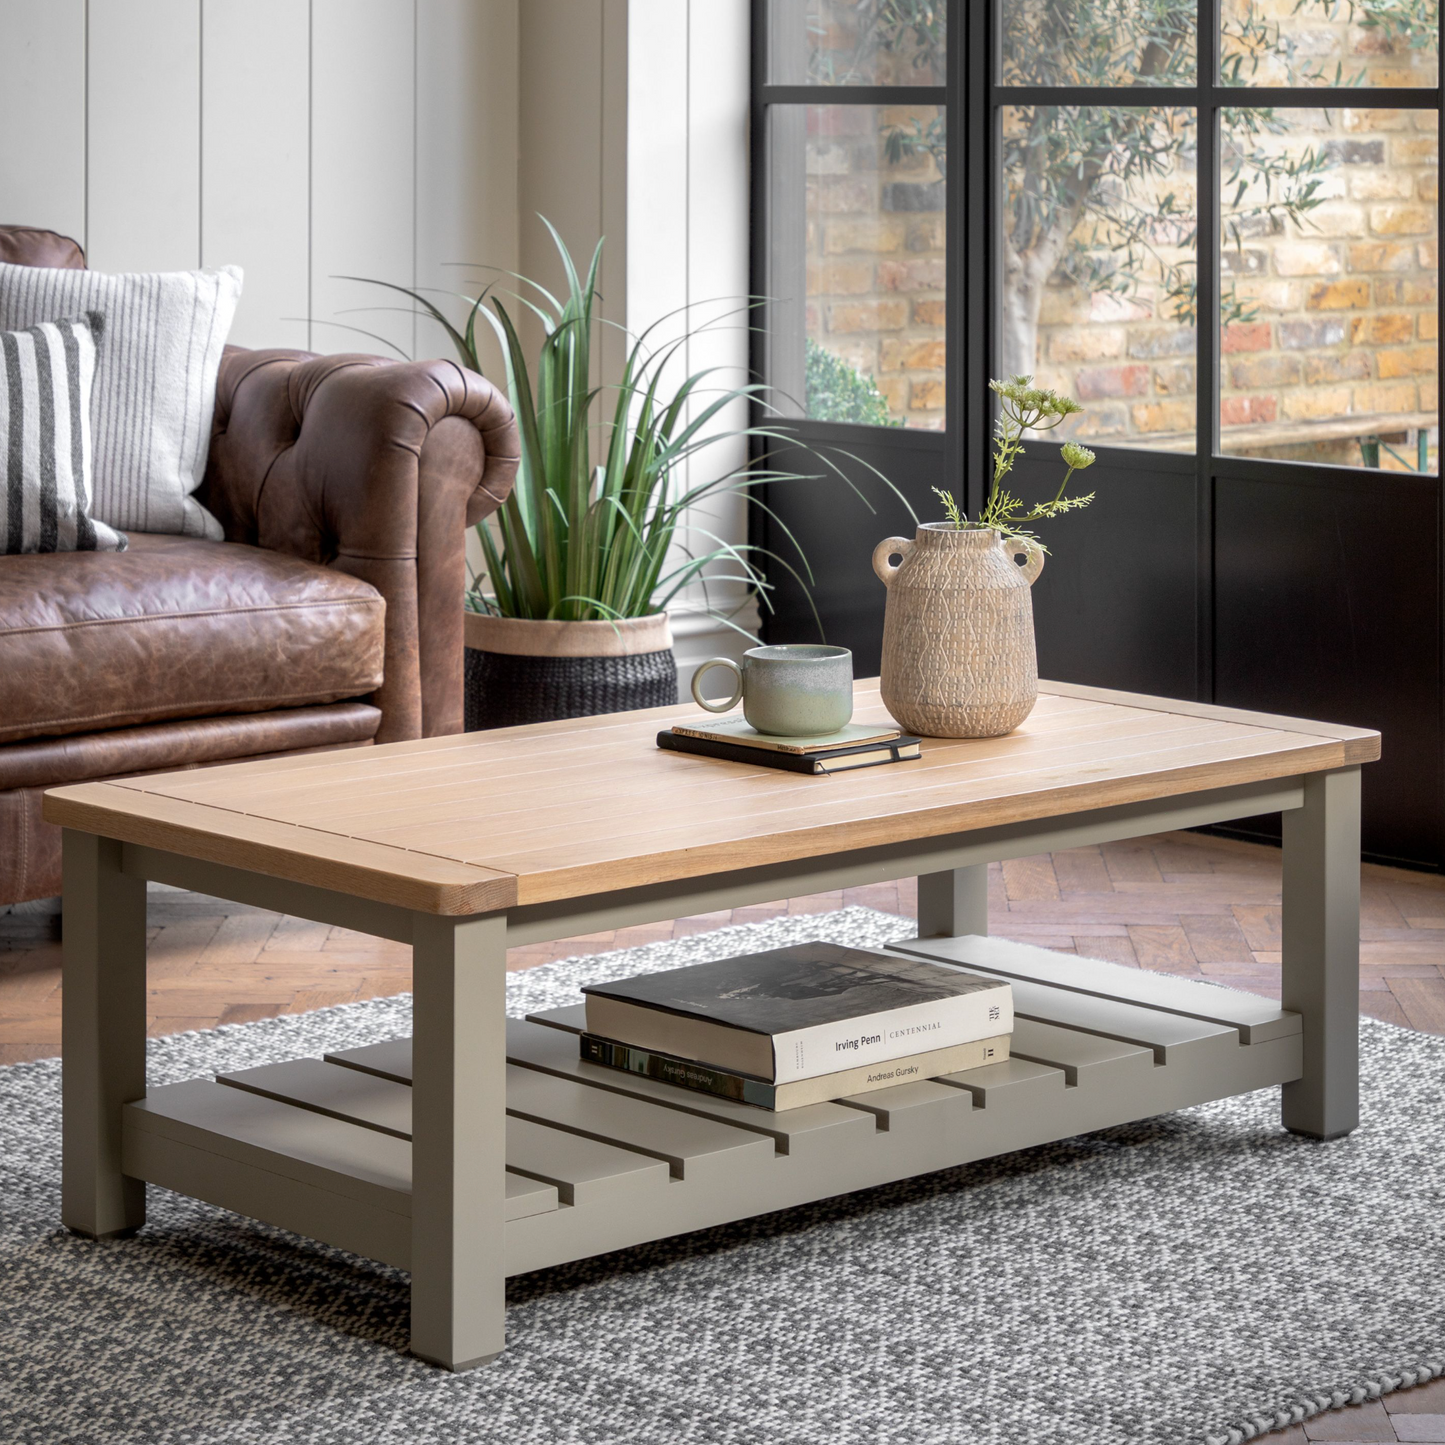 A Prairie coffee table from Kikiathome.co.uk in a living room with a large window, enhancing the home interior decor.